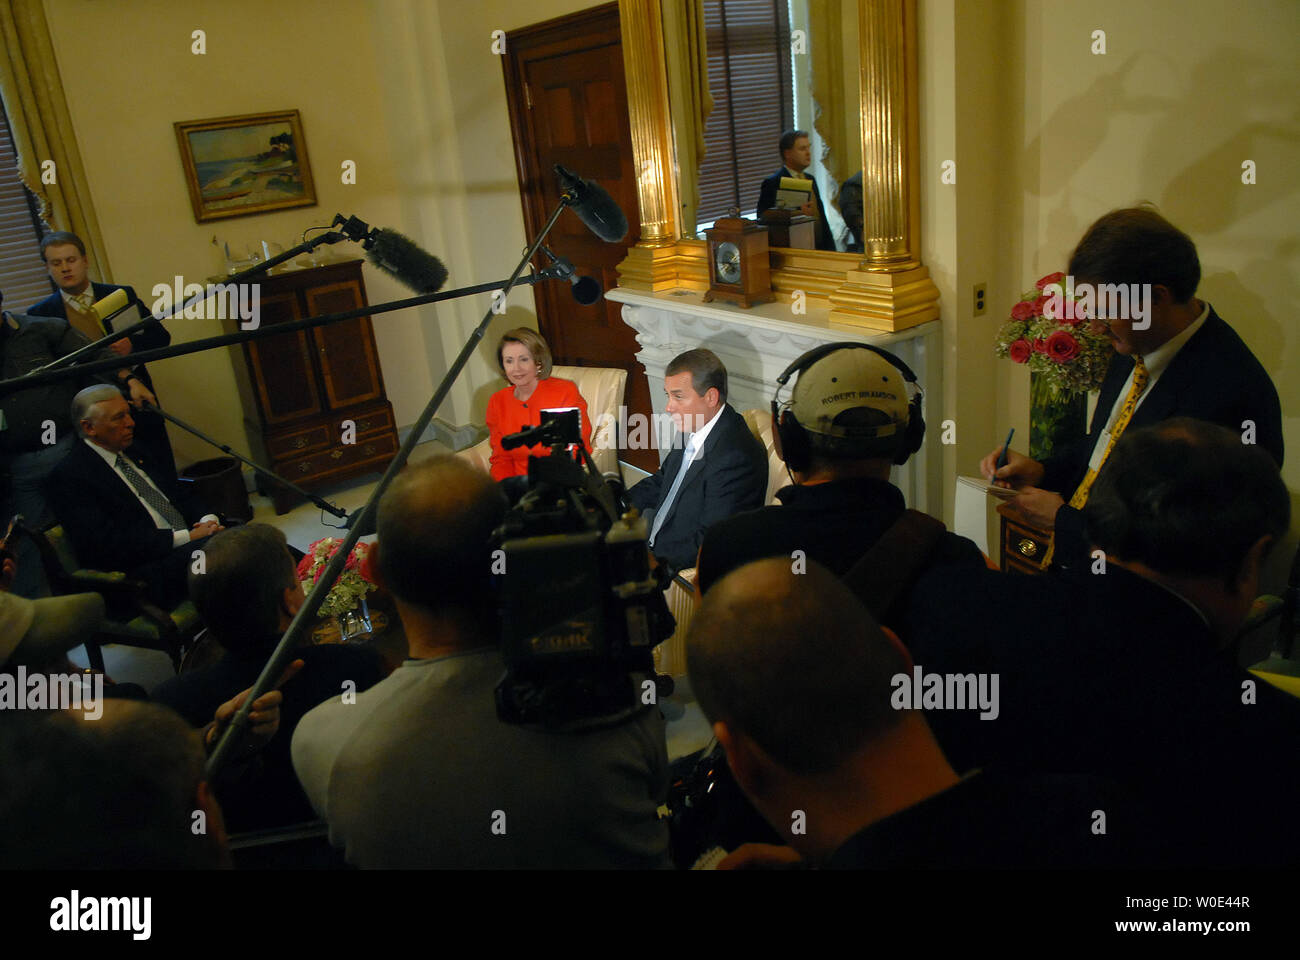 Speaker of the House Nancy Pelosi (D-CA) and House Minority Leader John Boehner (R-OH) speak to the media prior to a House leadership meeting in Washington on January 16, 2008. (UPI Photo/Kevin Dietsch) Stock Photo